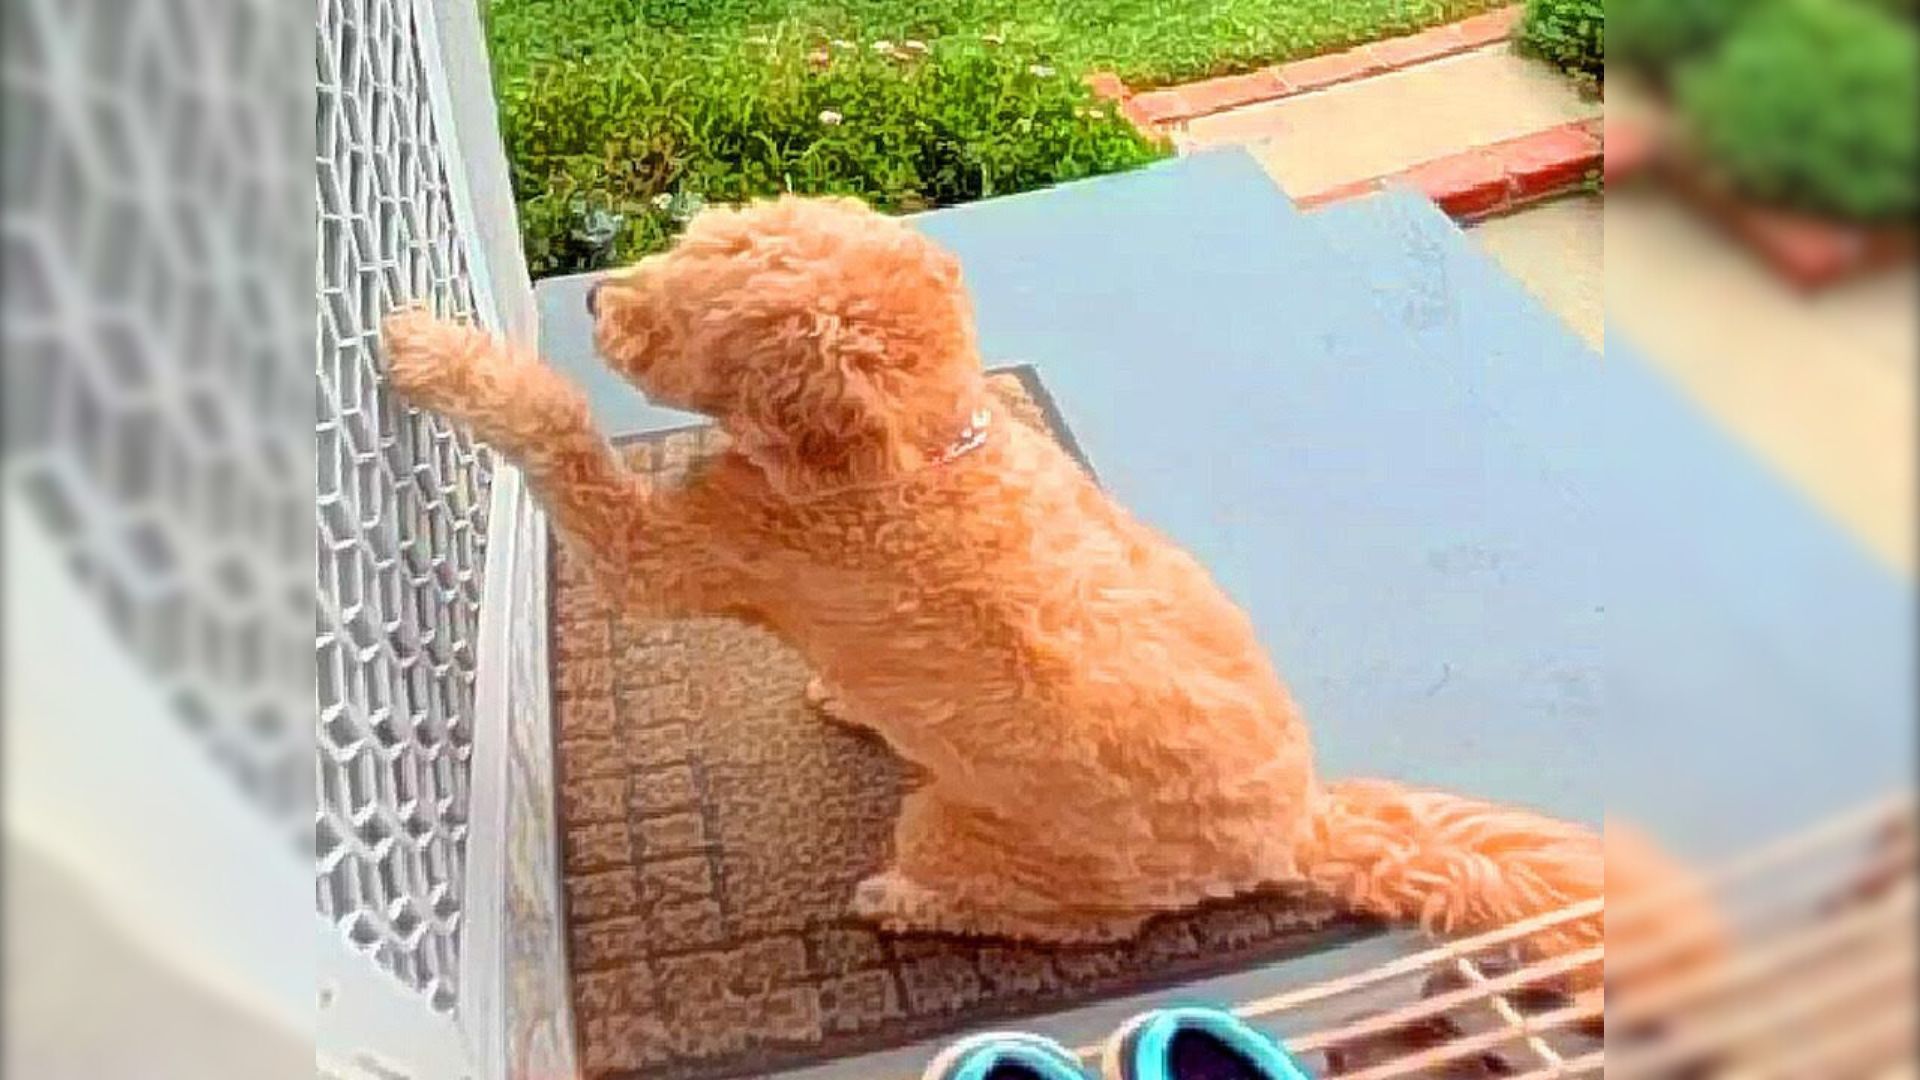 Goldendoodle Knocks On Her BFF’s Door And Shows What A Good Neighbor She Is